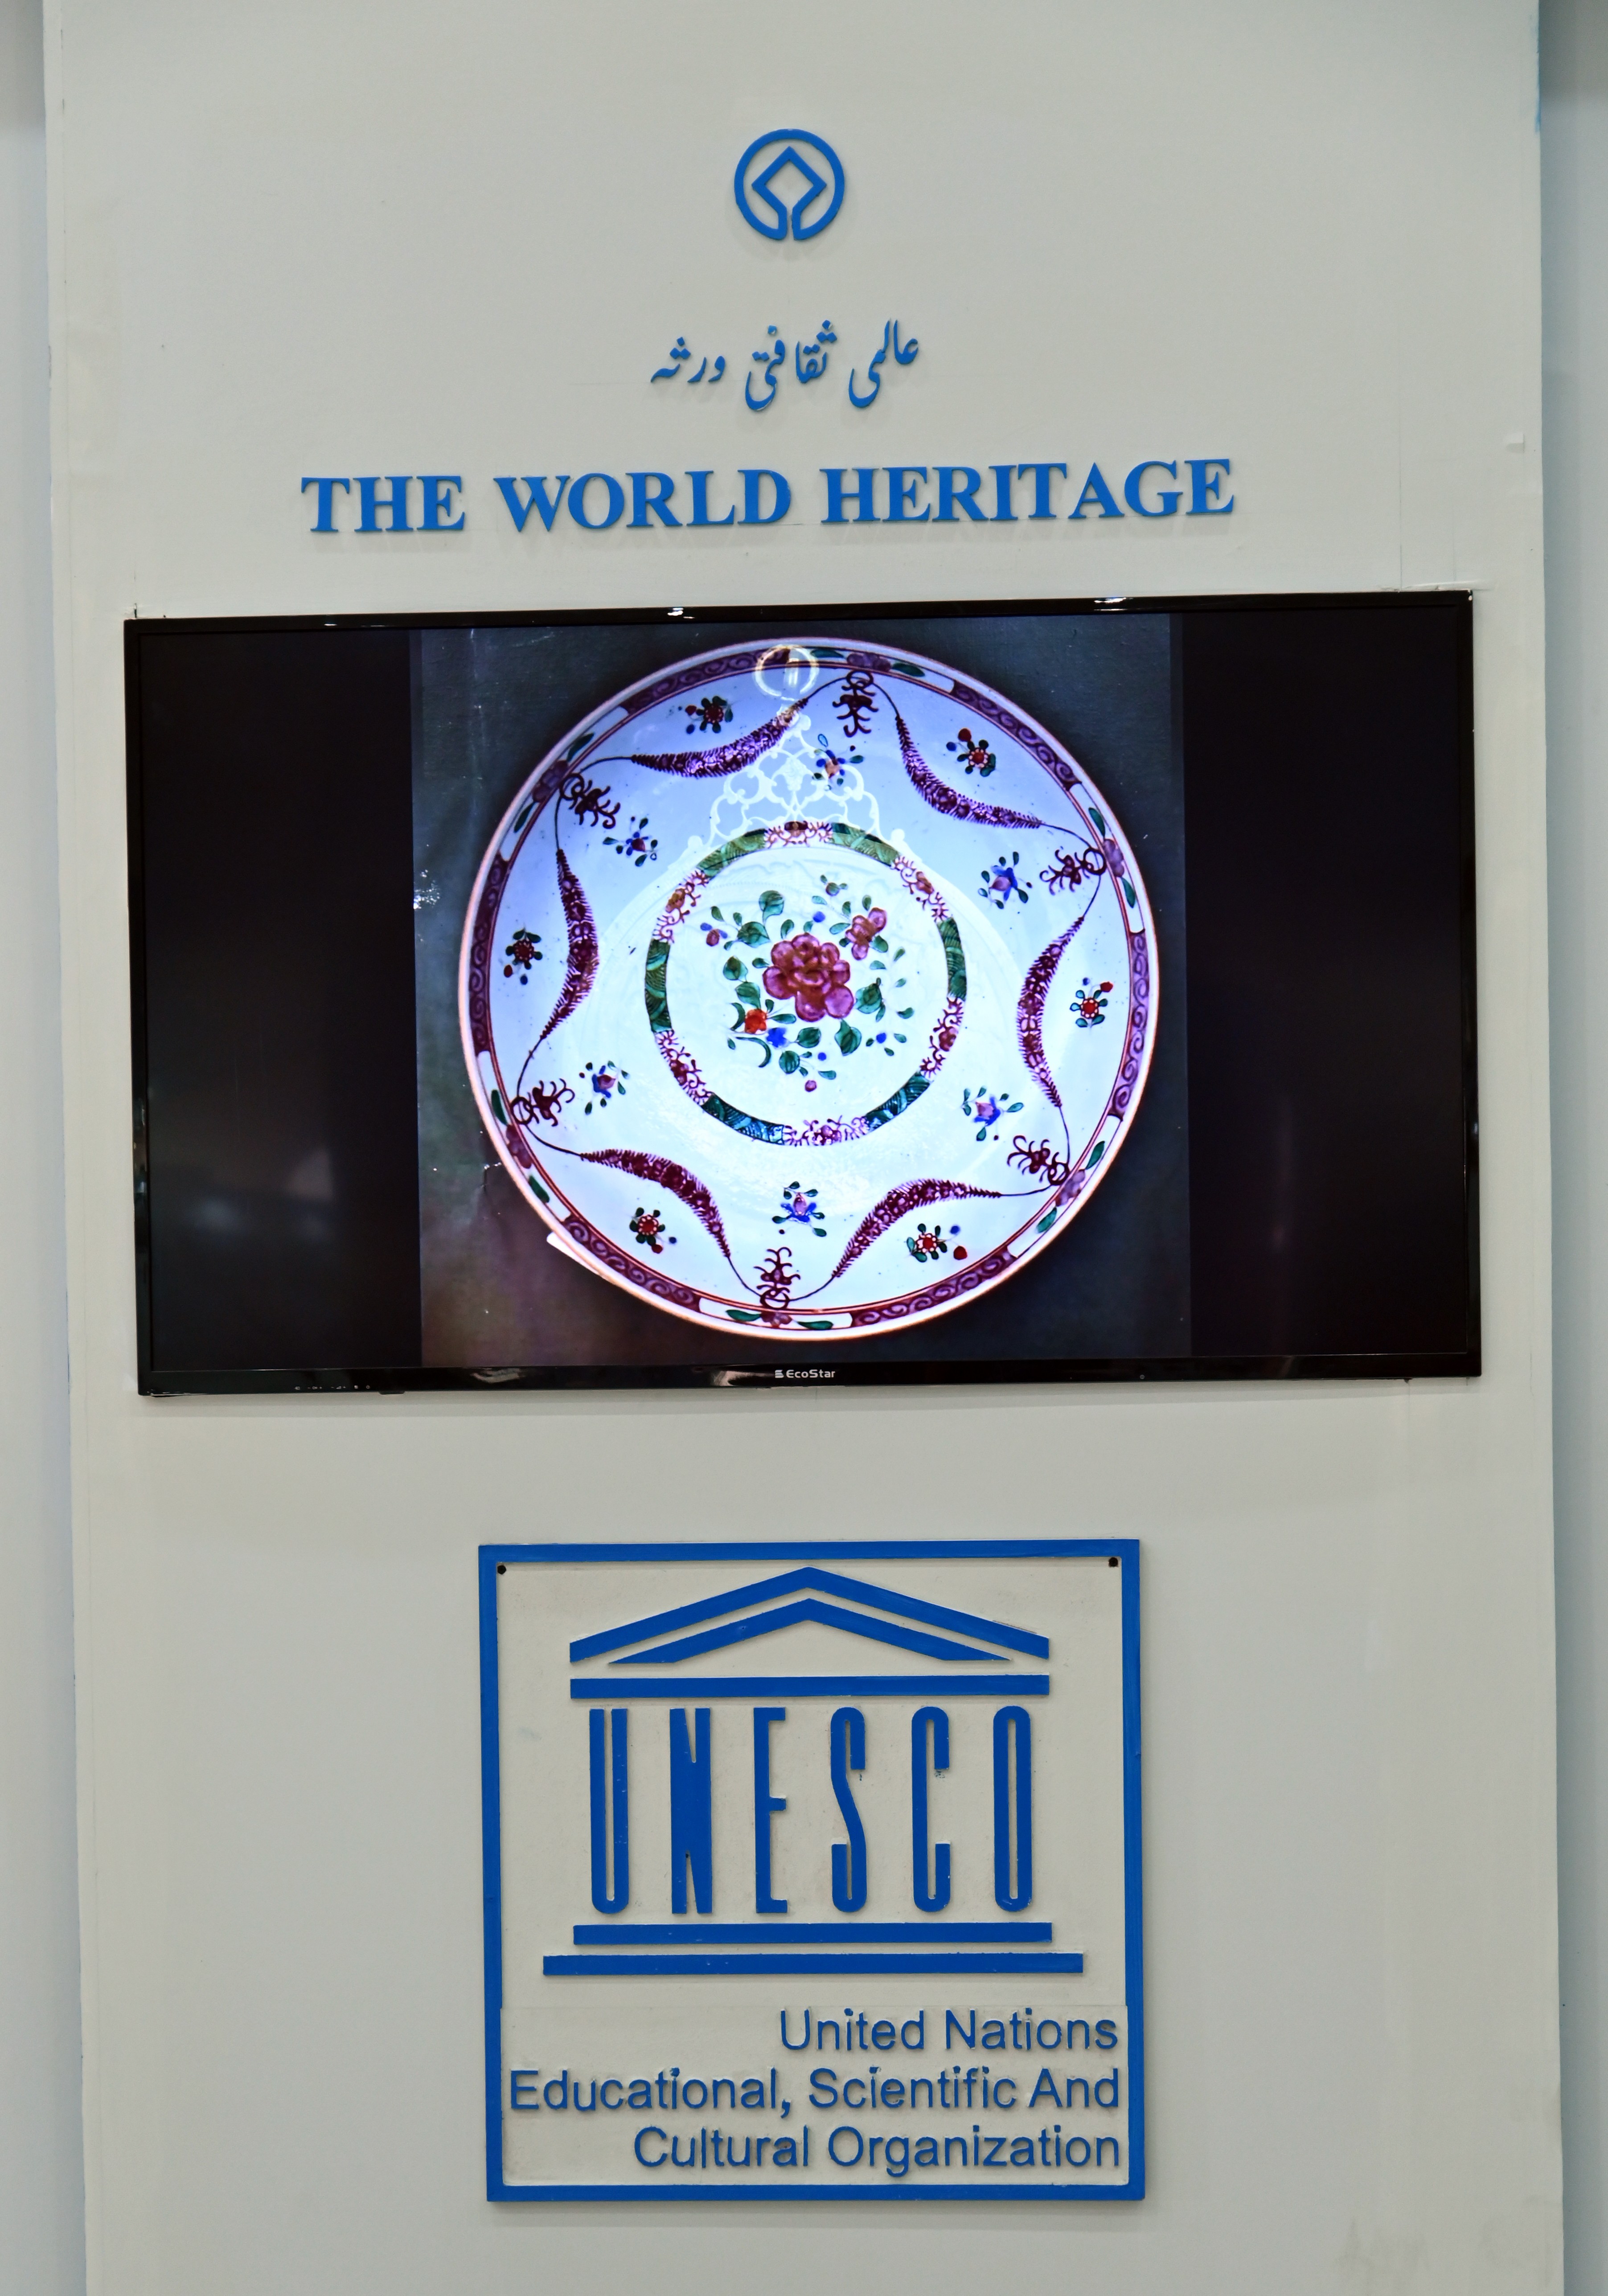 The wall depicting The World Heritage and the logo of UNESCO